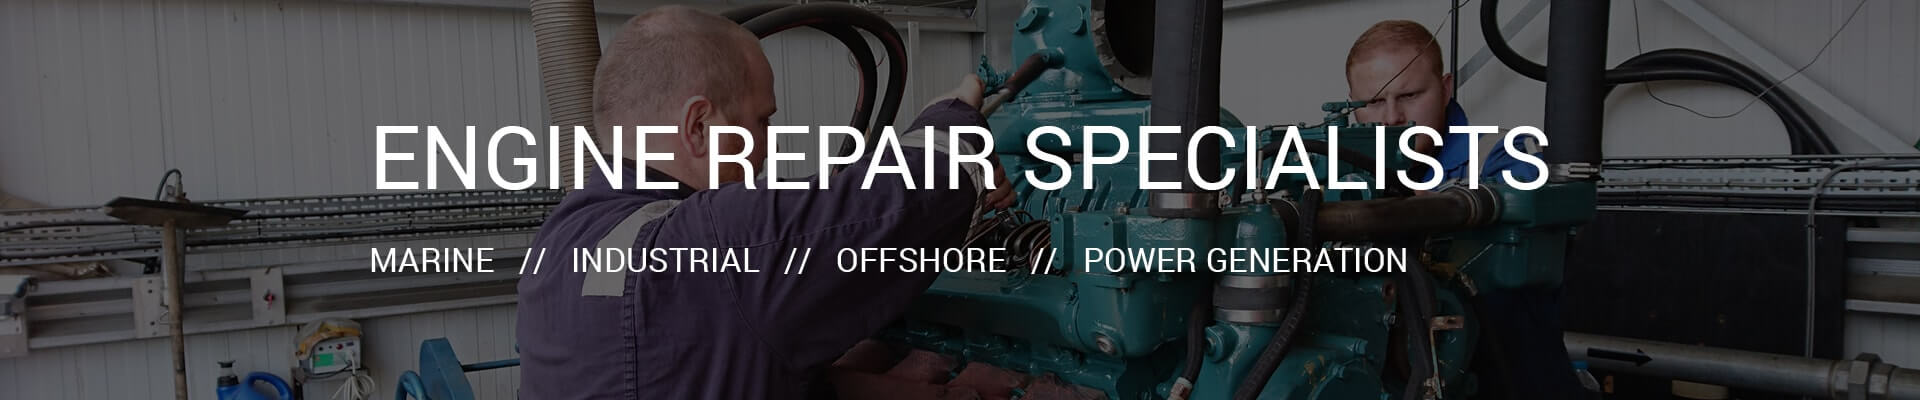 Engine Repair Specialists Banner